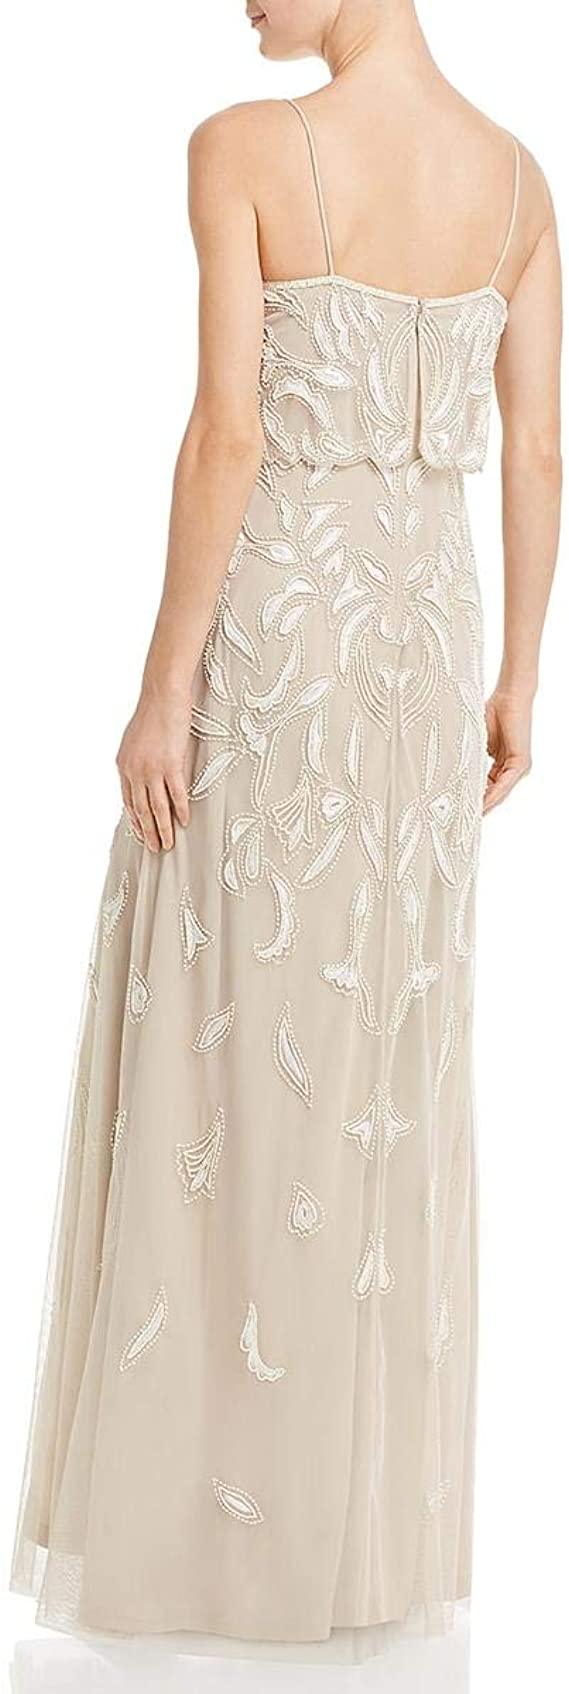 Adrianna Papell Formal Beaded Long Dress AP1E205376 - The Dress Outlet